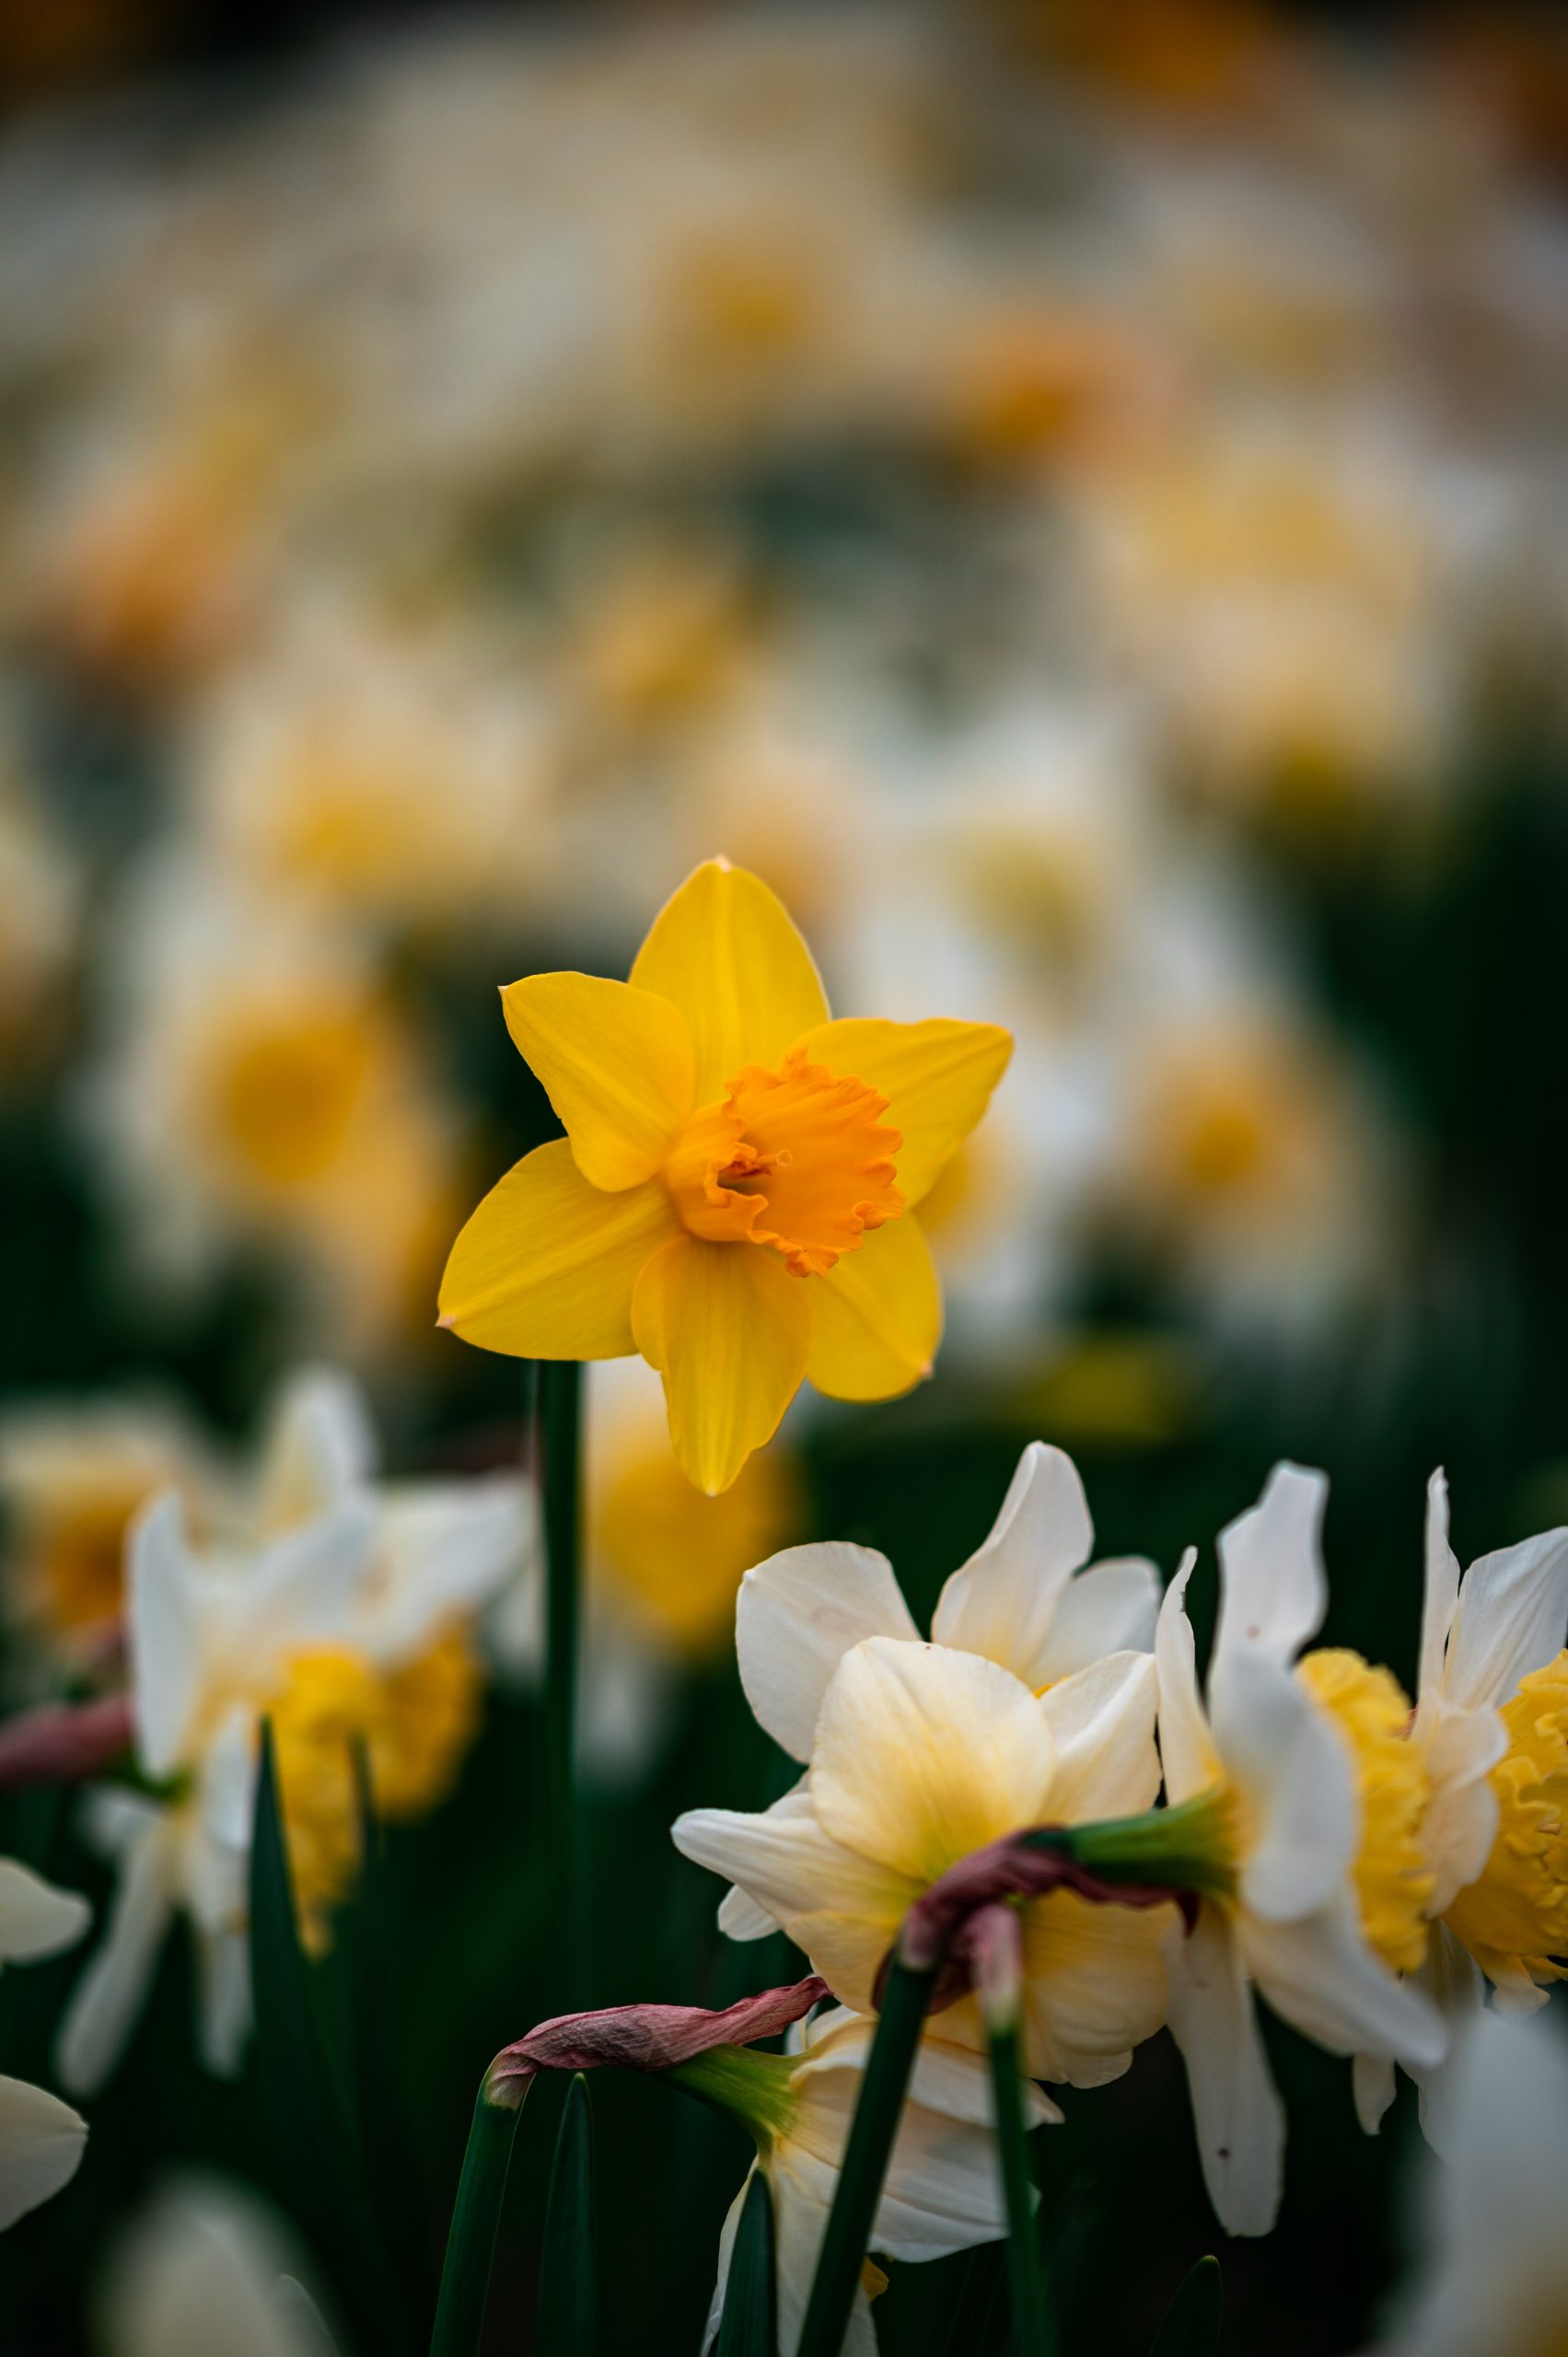 What Is The Difference Between Daffodils And Buttercups? Are They The Same Thing?